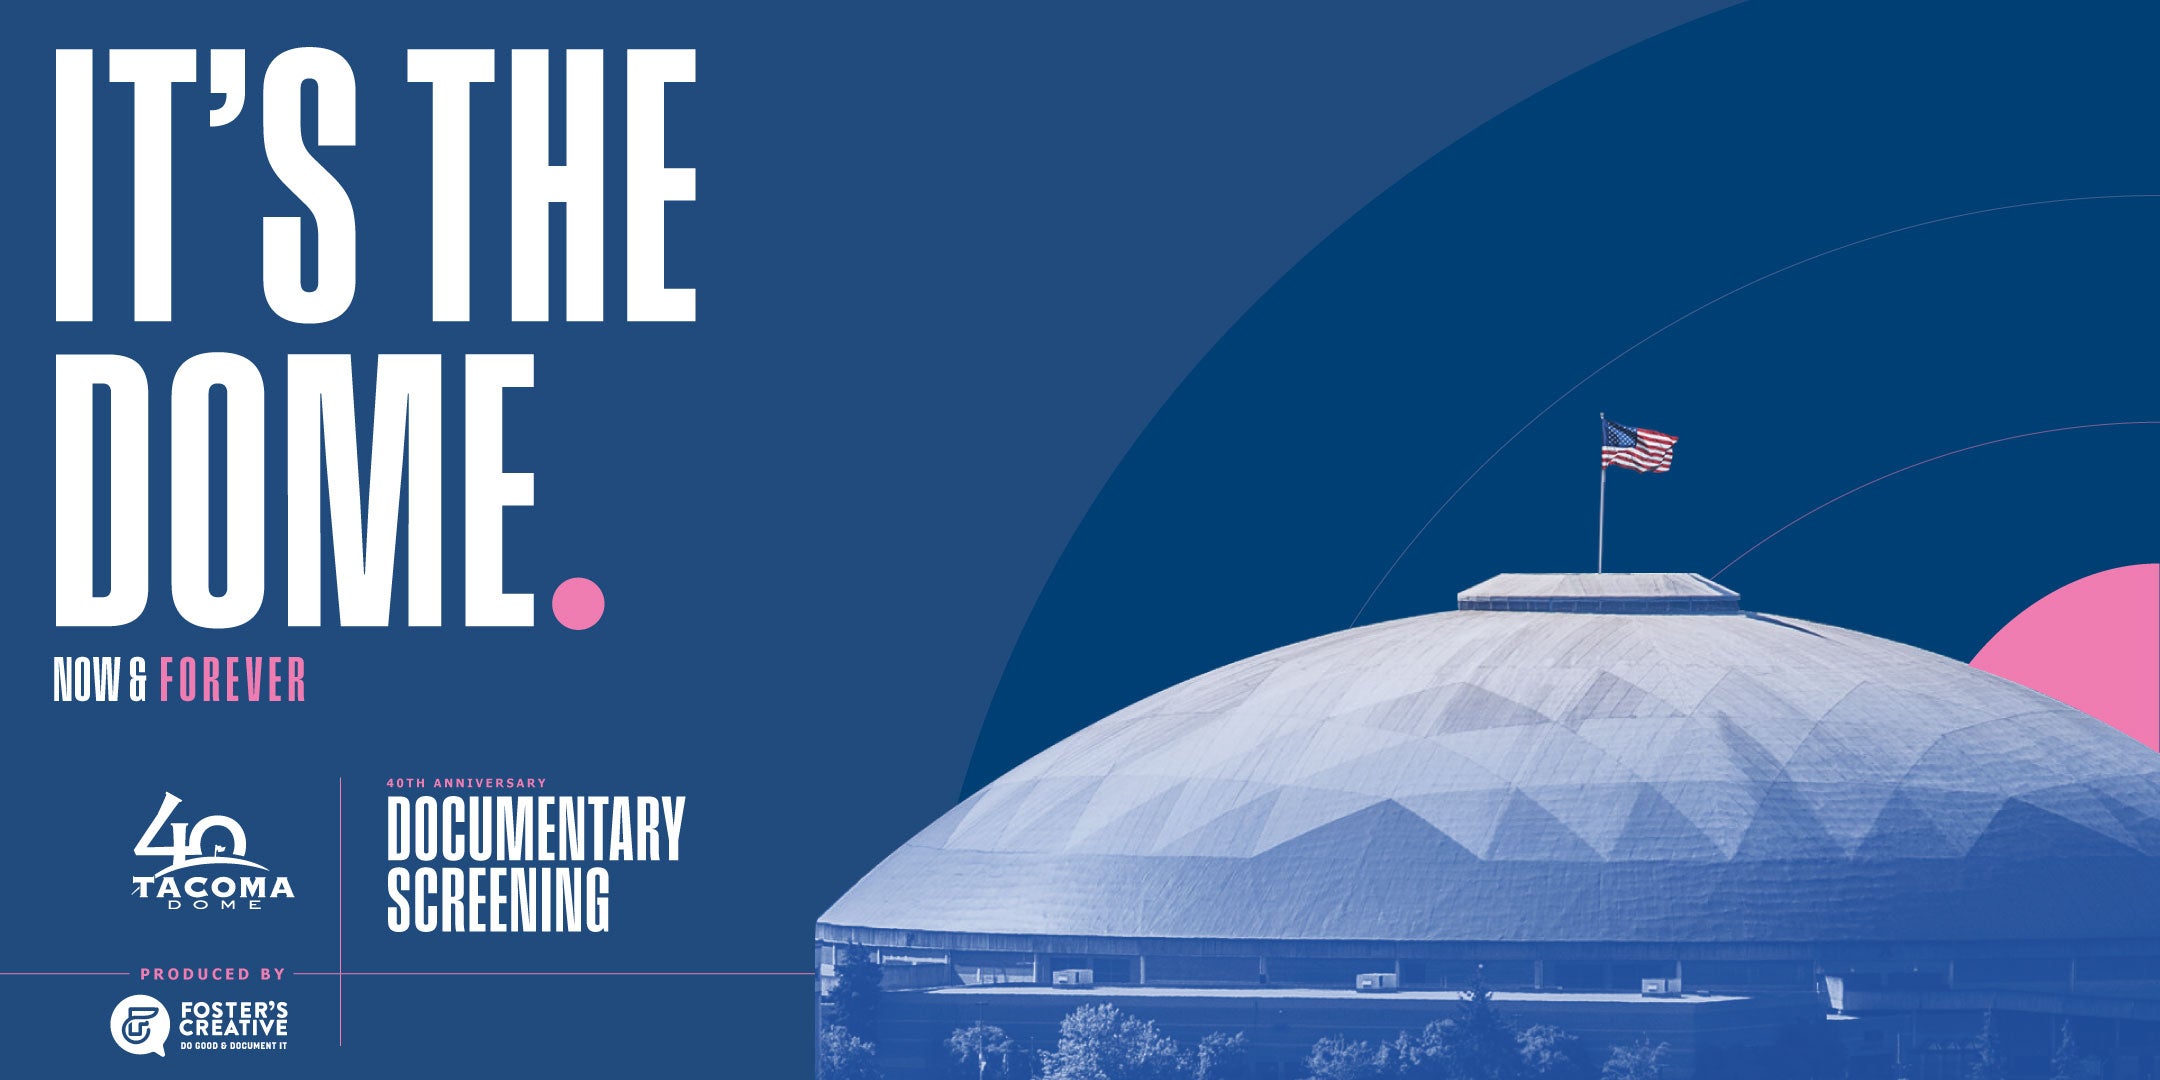 More Info for "It's The Dome. Now & Forever." Now Available Online